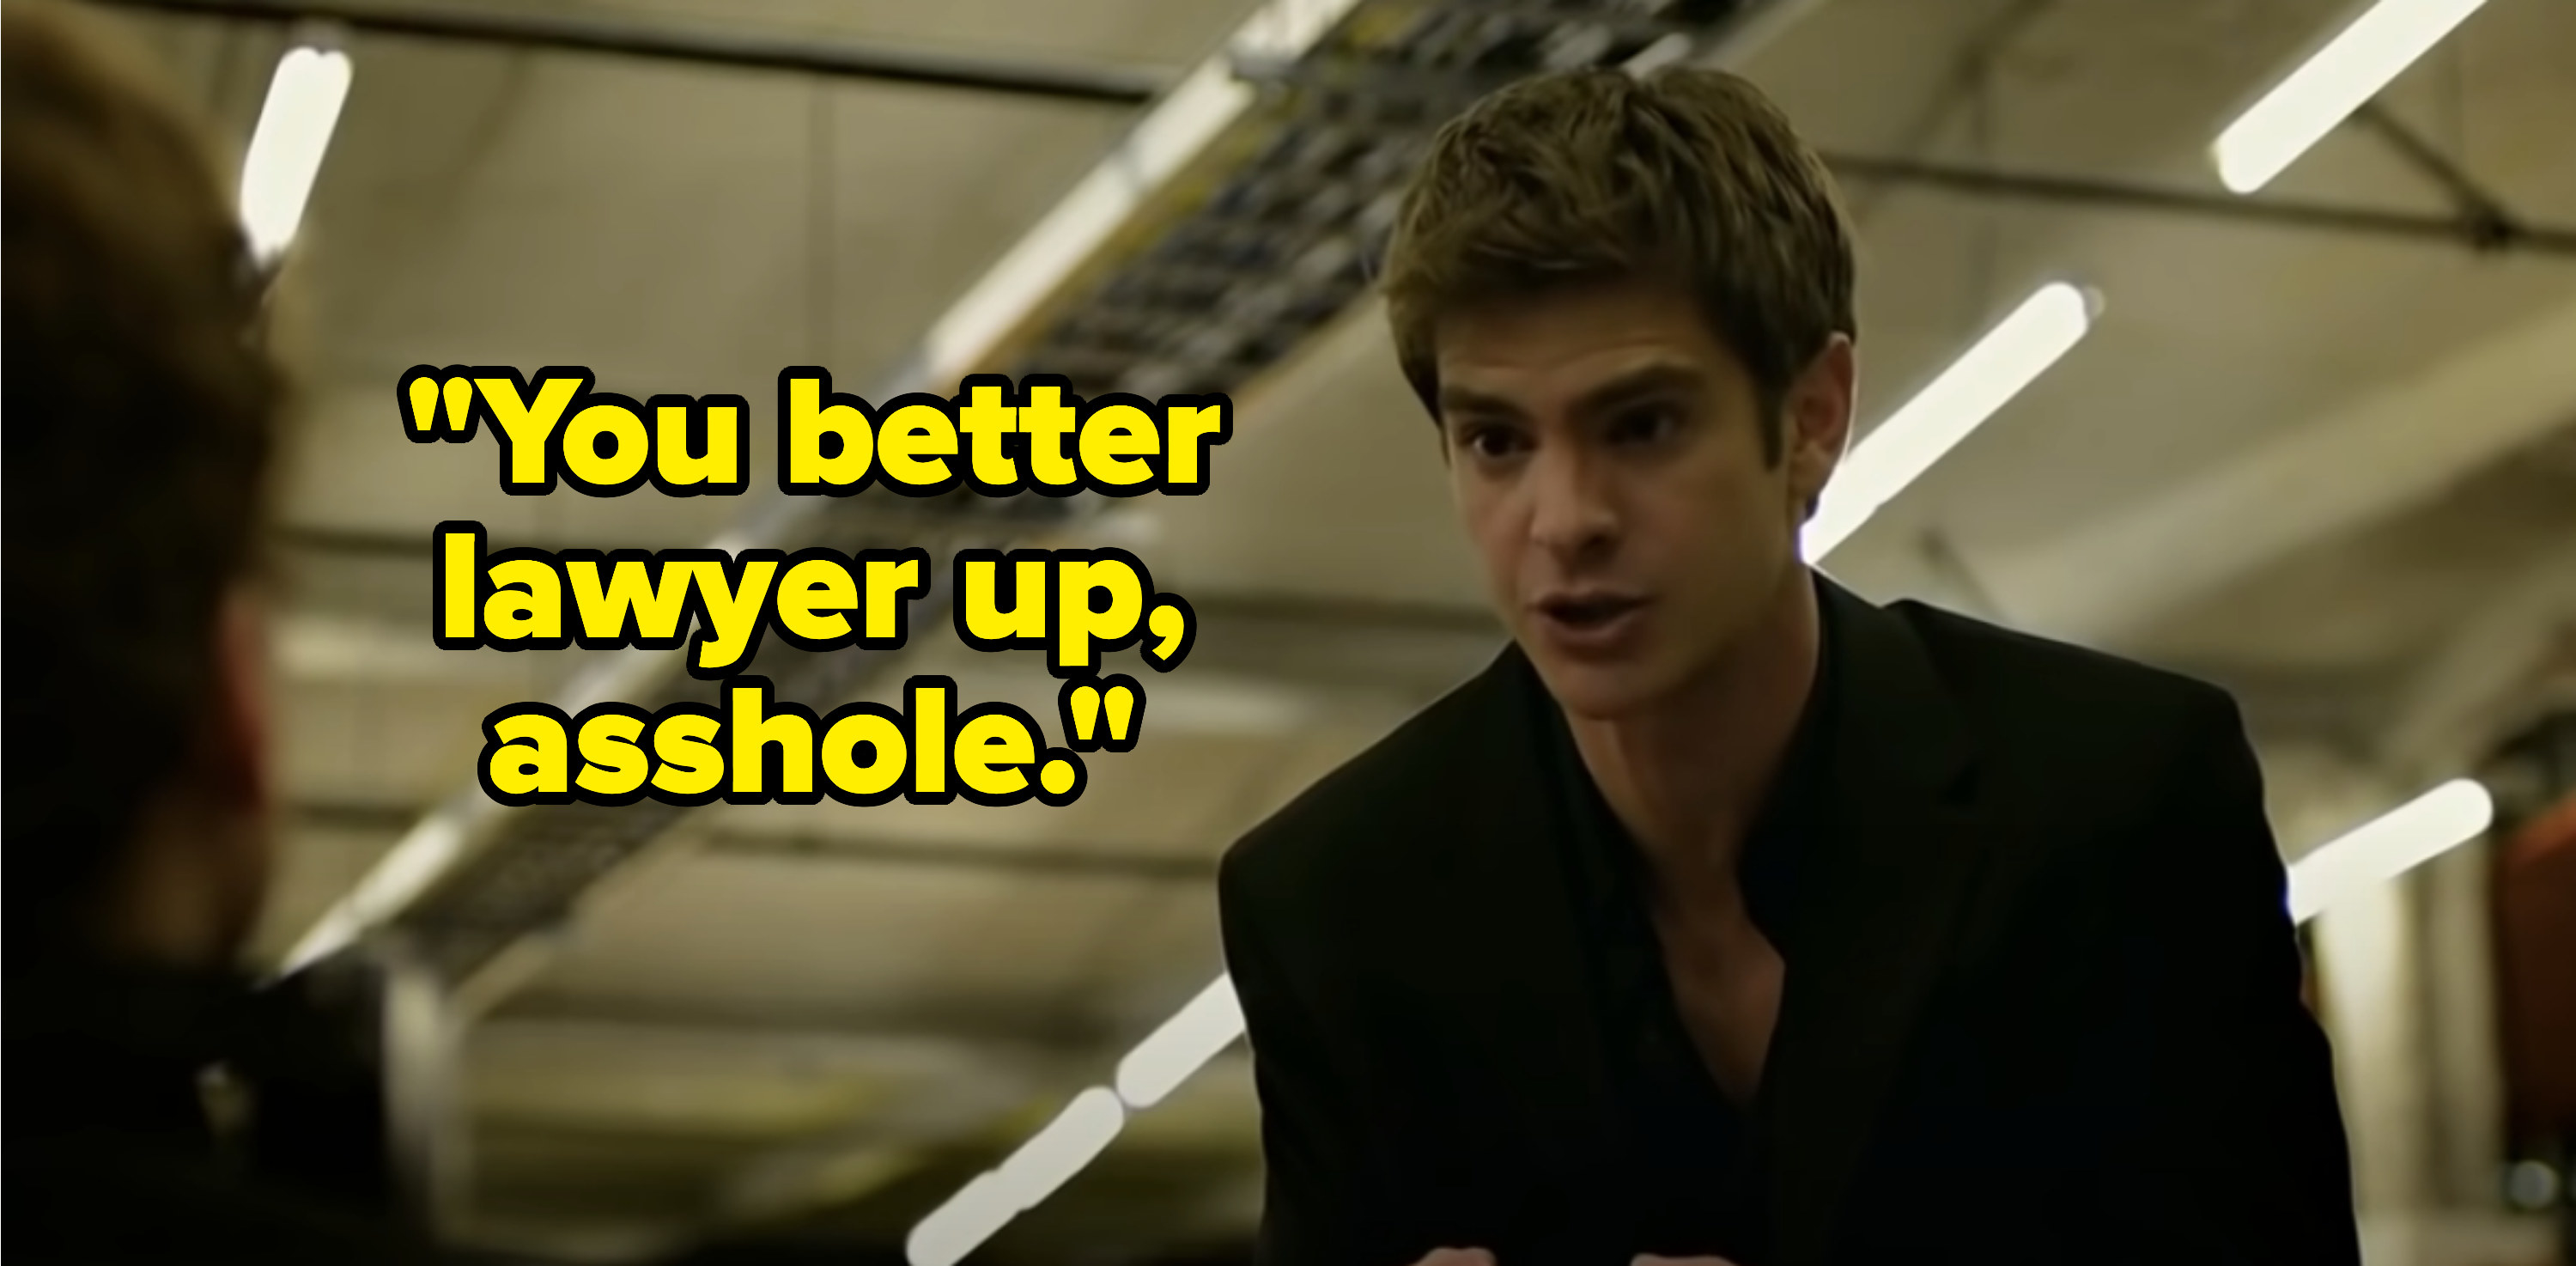 in the social network, eduardo says &quot;You better lawyer up, asshole&quot;